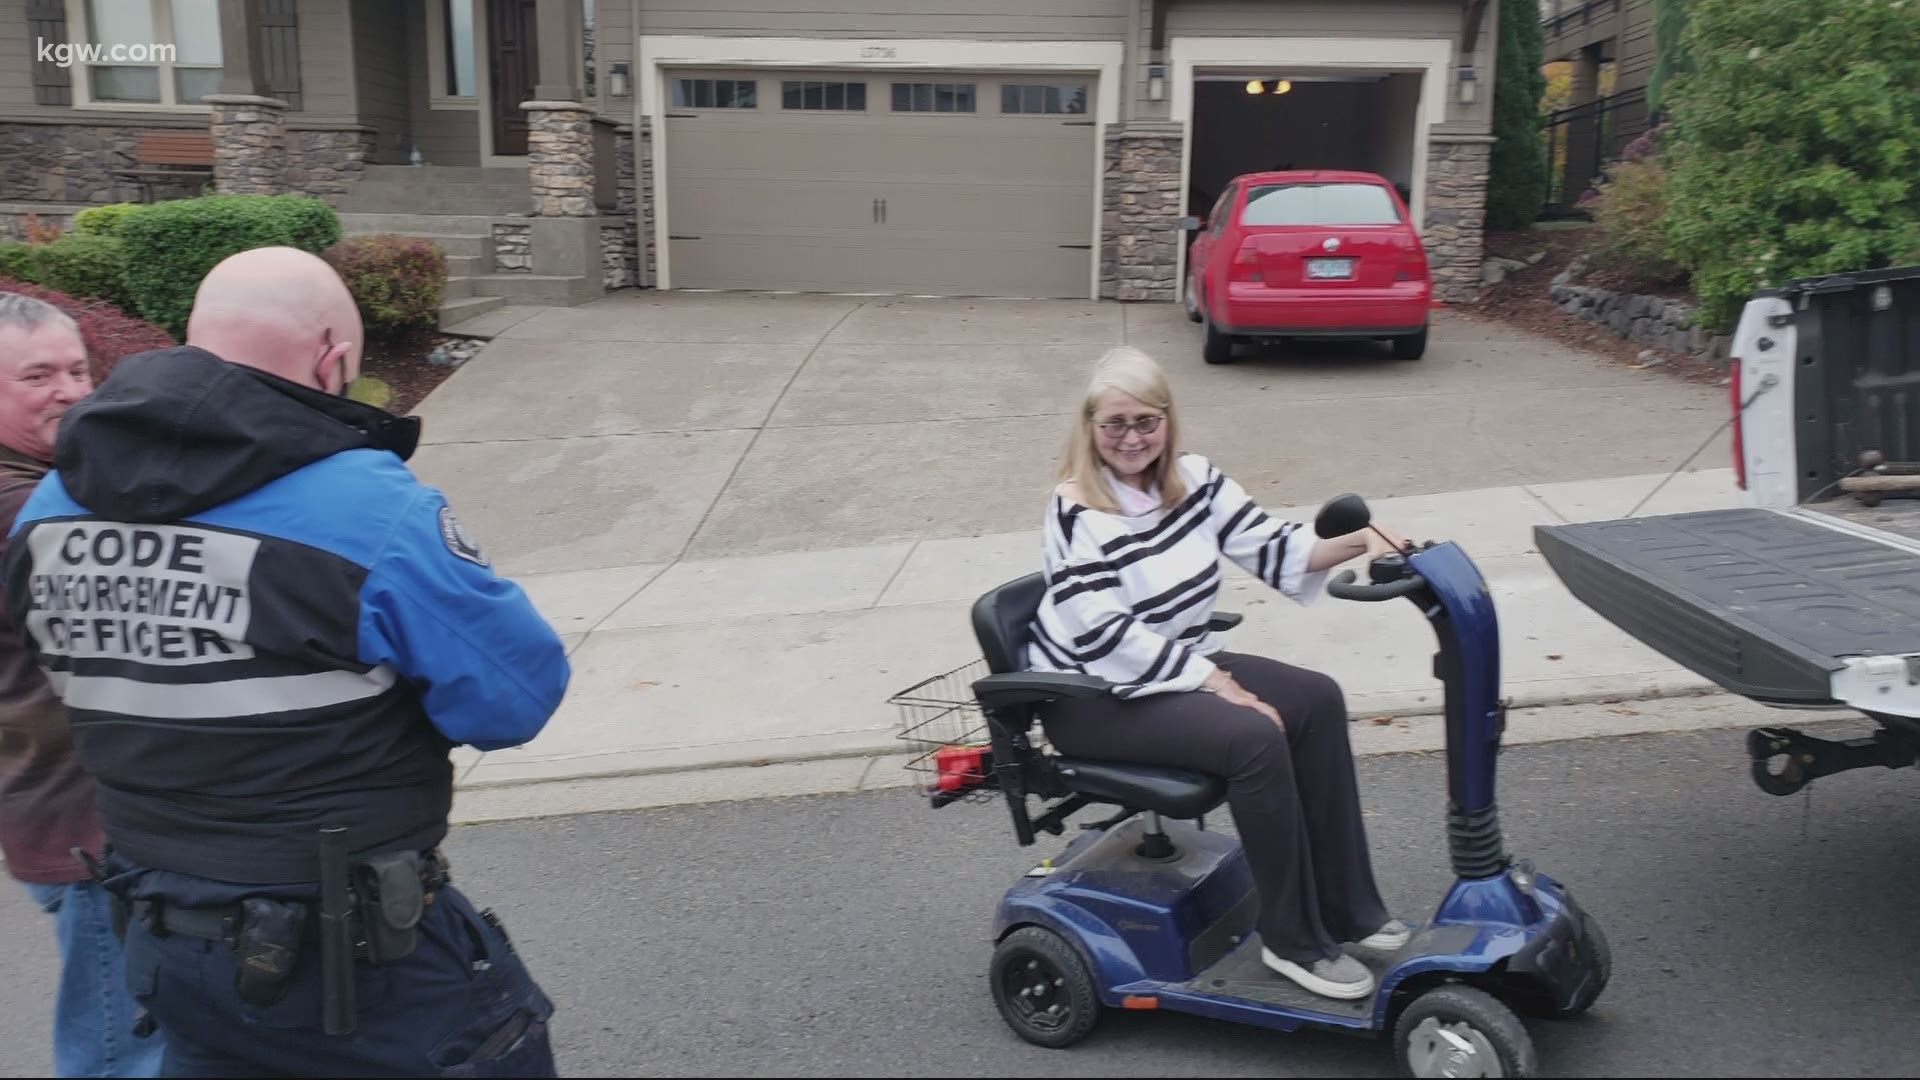 "Police get a bad rap sometimes but they worked diligently and really quickly to help me get my scooter back," Lynne Gibbons-Gray said.